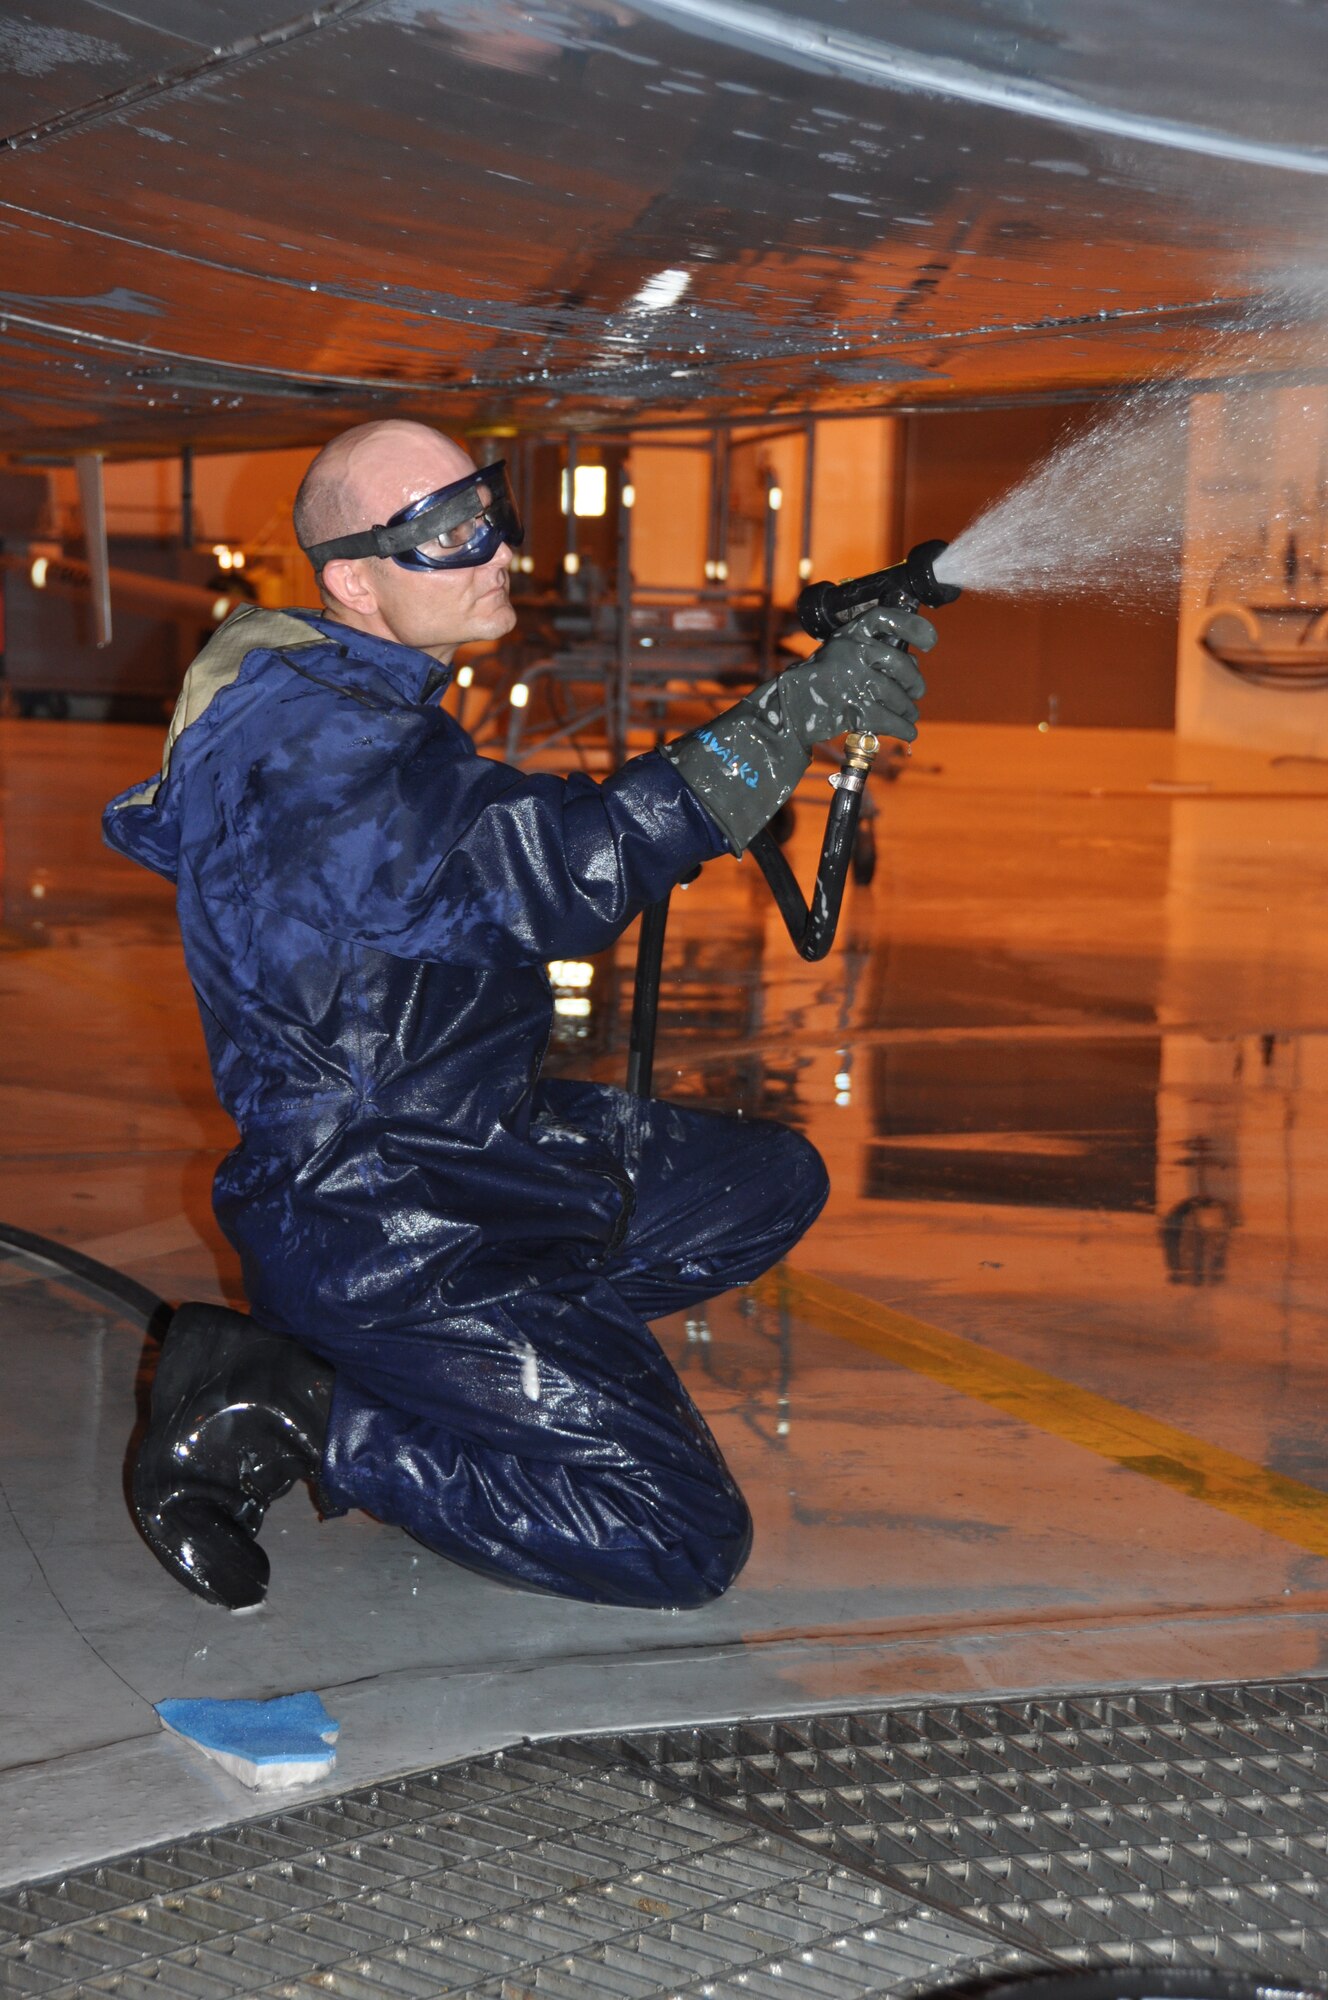 Staff Sgt. Ryan Harris, 507th Aircraft Maintenance Squadron crew chief rinses soap off the belly of a KC-135 Stratotanker which was scheduled for its routine wash on May 5, 2013 in the hanger known as the fuel barn.

Aircraft go through a general wash cycle of 180 days unless they are sent into more corrosive environments.  Depending on the kind of environment the wash cycle changes to either 30, 60 or 120 days.  Flights conducted in salt water areas would be scheduled more often to ensure the salt does not corrode any parts.  

Although the aircraft is generally washed with aircraft soap and hot water, some chemicals are authorized for specific needs.

Once the entire aircraft has been thoroughly washed and rinsed, the joints and other parts will get re lubricated and inspected.

This aircraft being washed during the May Unit Training Assembly is good training for traditional reservists.  It not only gives them a chance to perform a through and proper wash along with re lubricating joints and other parts, but also gives them a chance to properly follow instructions from the technical order provided for a proper wash.  (U.S. Air Force photo by Senior Airman Mark Hybers)
